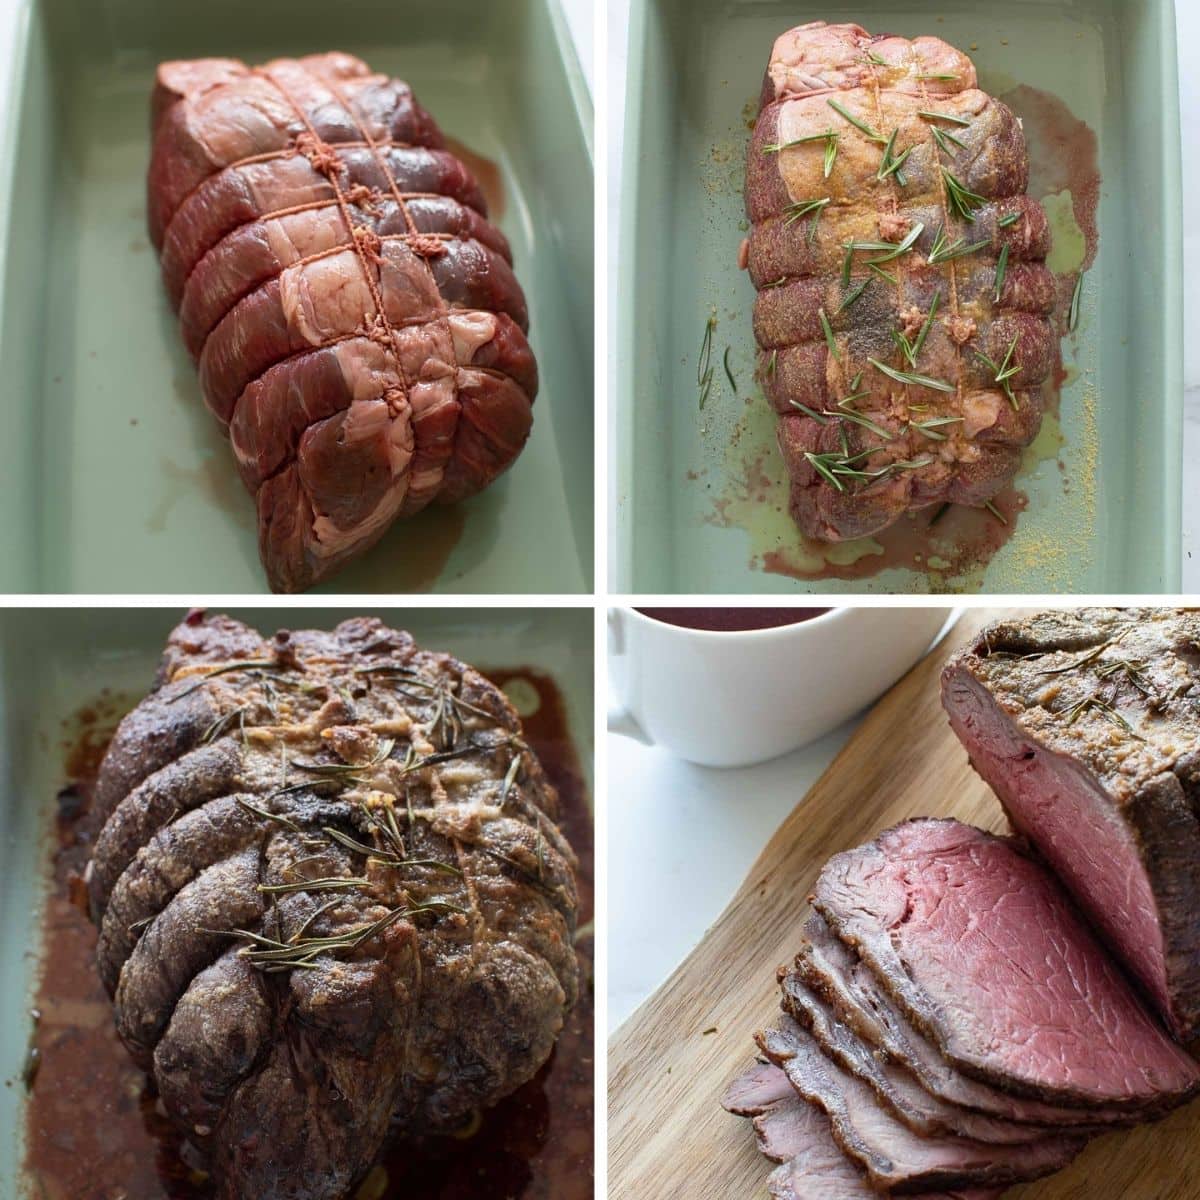 Step by step images showing how to roast topside of beef.